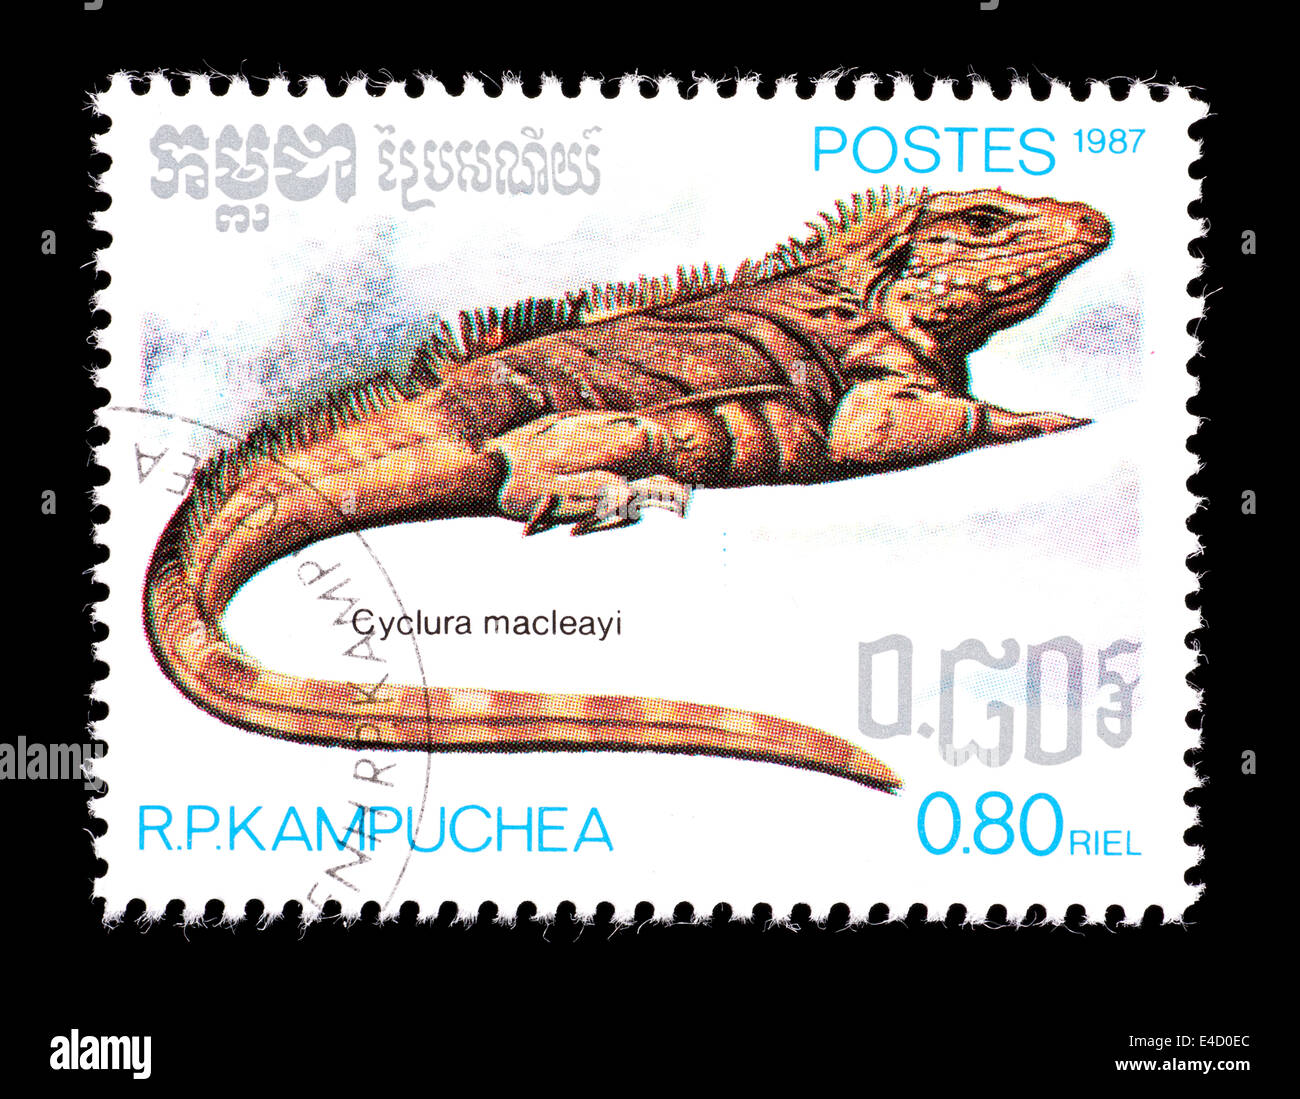 Postage stamp from Kampuchea (Cambodia) depicting a blue or Grand Cayman iguana (Cyclura nubila) Stock Photo